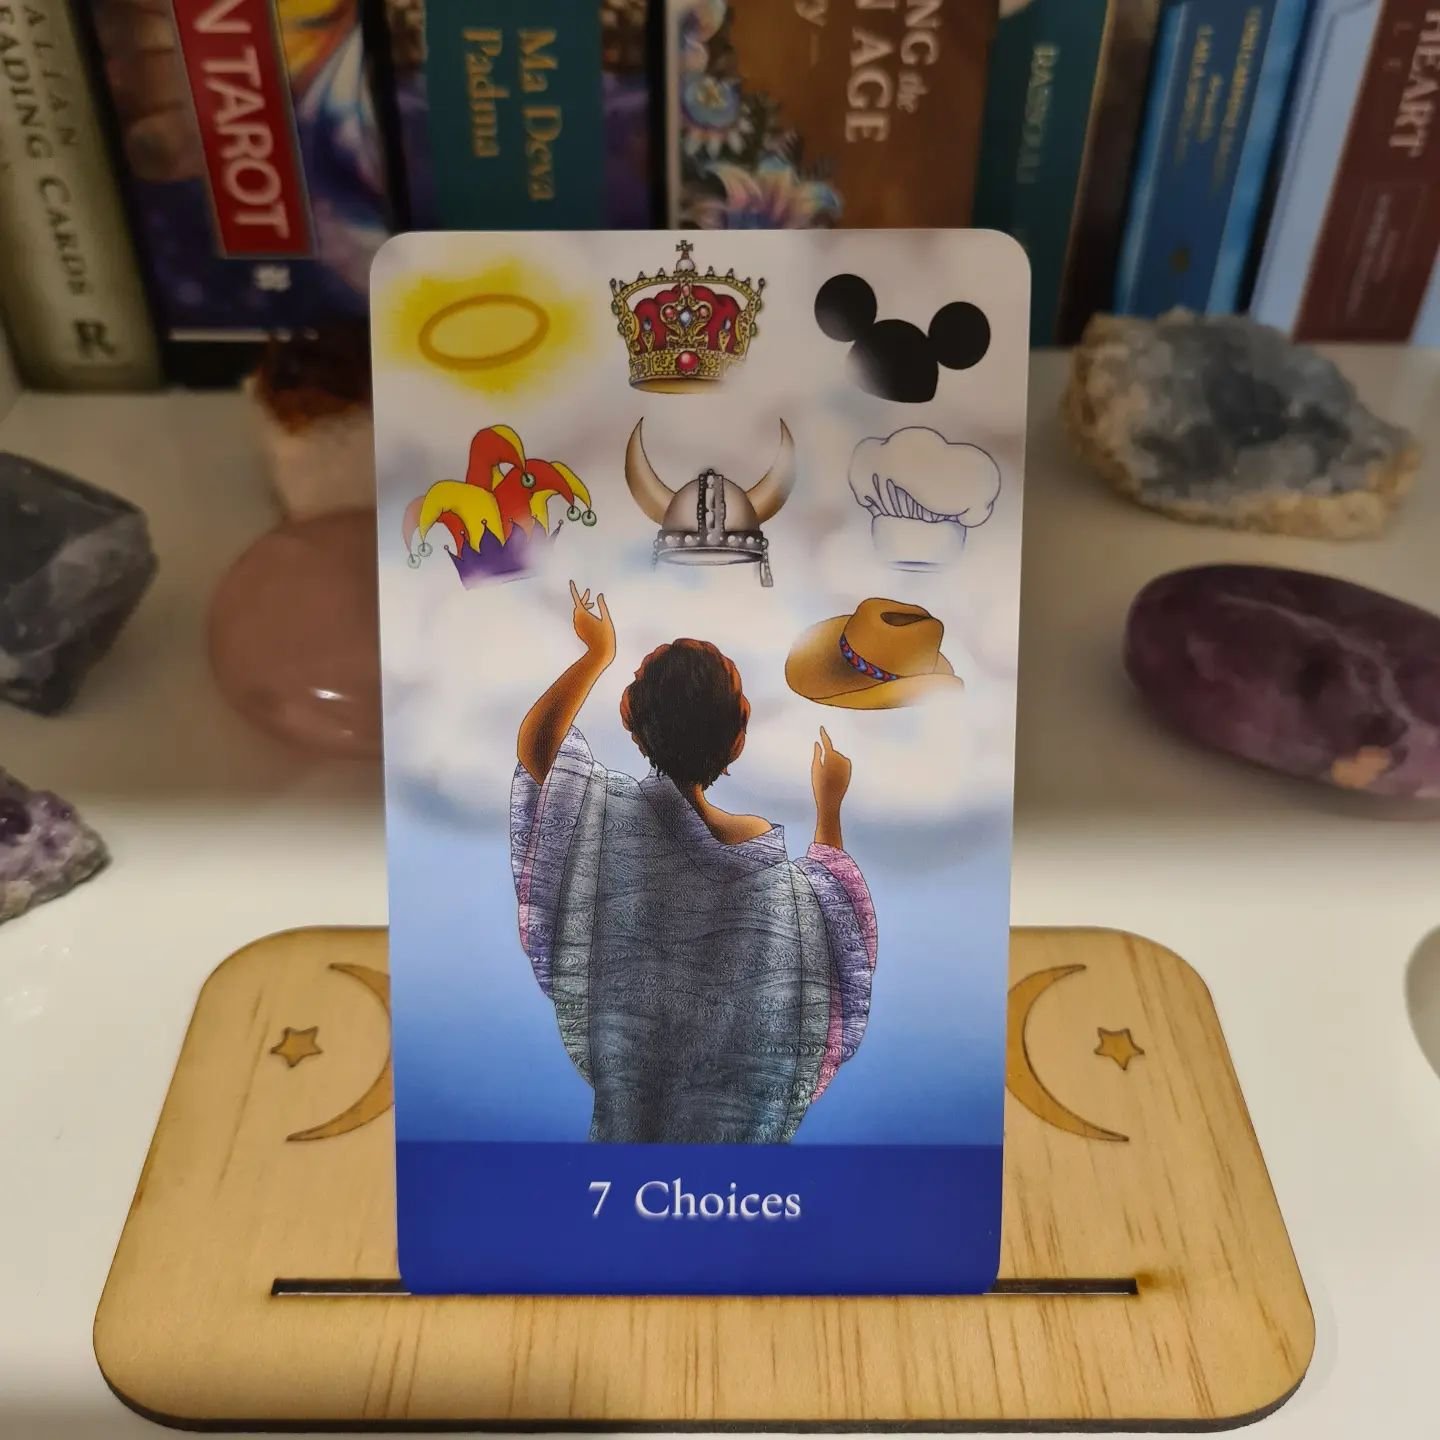 Friday Insight 🌊 &quot;Choices&quot; which path will you choose?

When this card of &ldquo;Choices&rdquo; appears, it has stirred up fear of the unknown for many of my clients. The card image shows the different hats we wear, the roles we play in ou